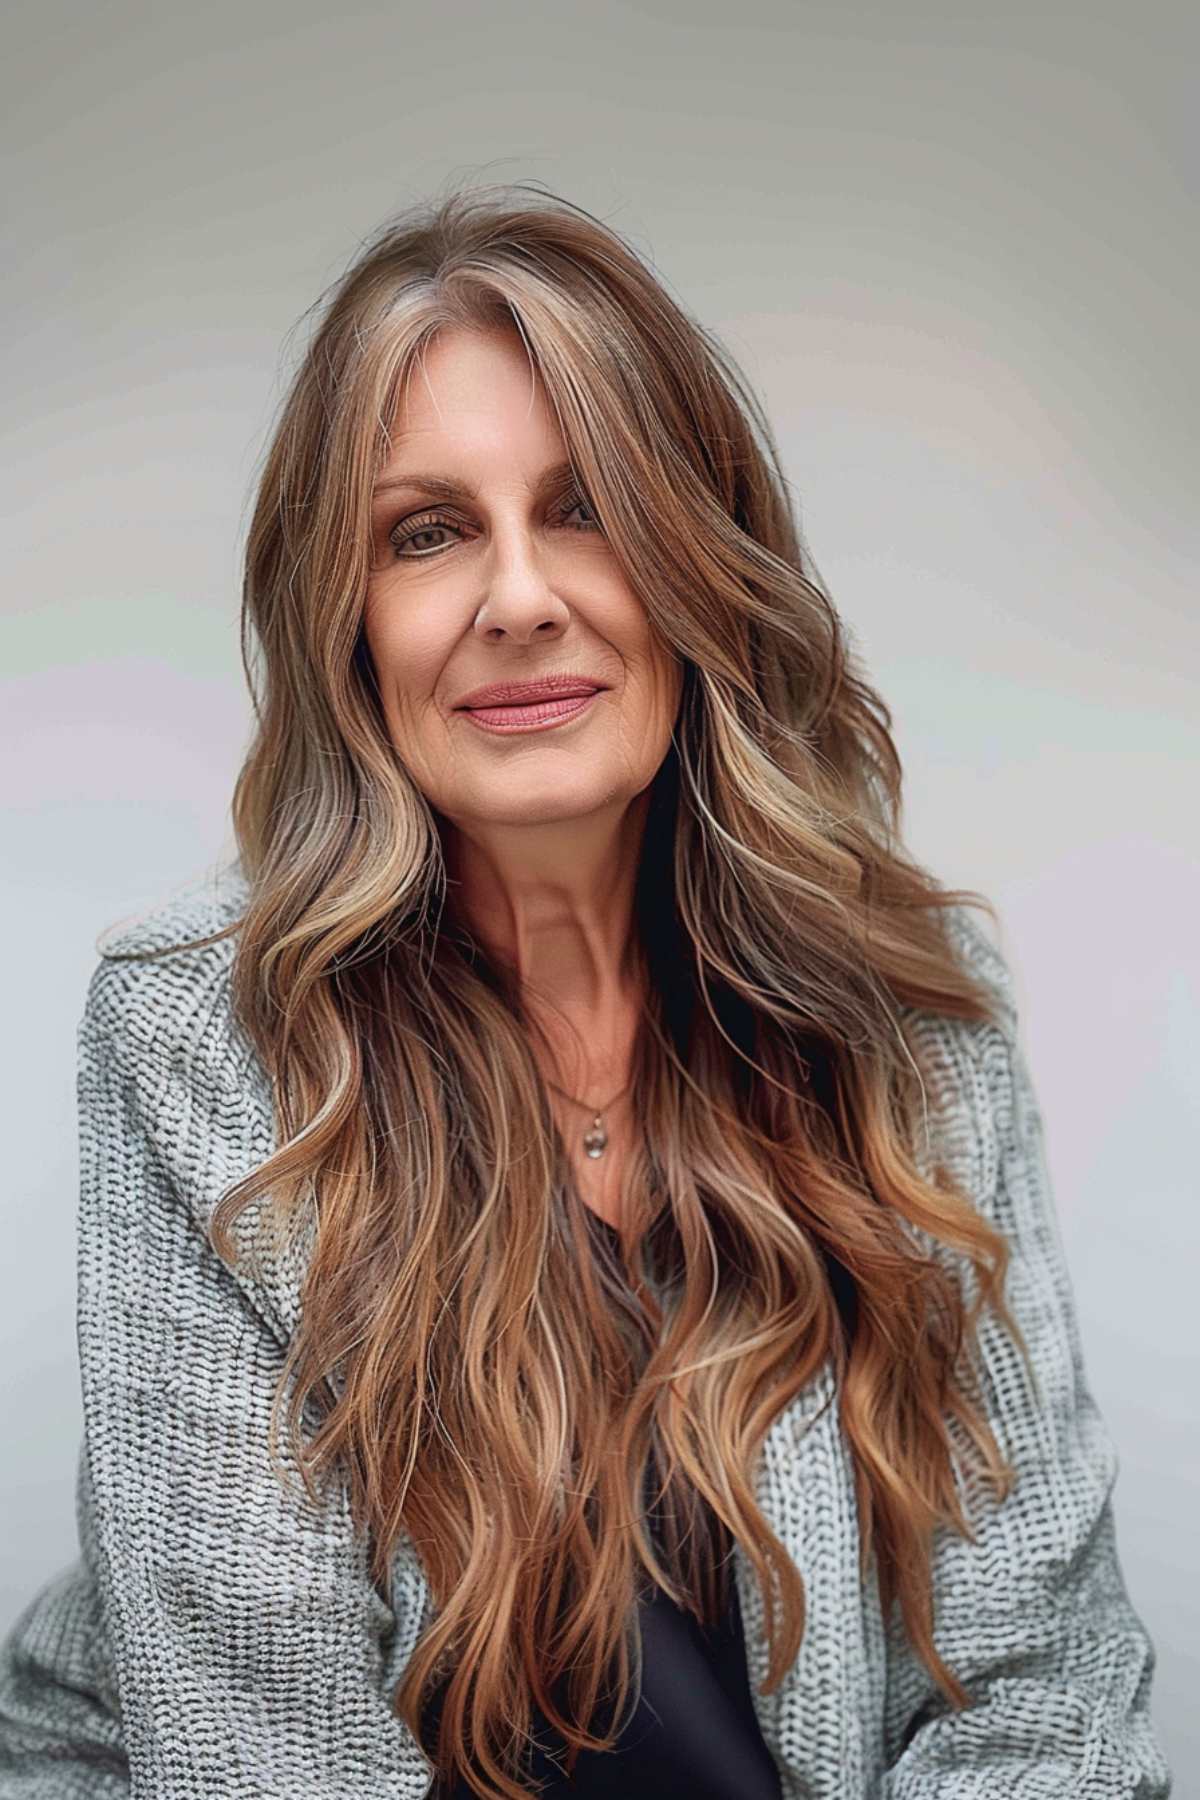 Sophisticated long layered haircut with balayage highlights on a woman over 50, showcasing voluminous wavy hair in a stylish ensemble.